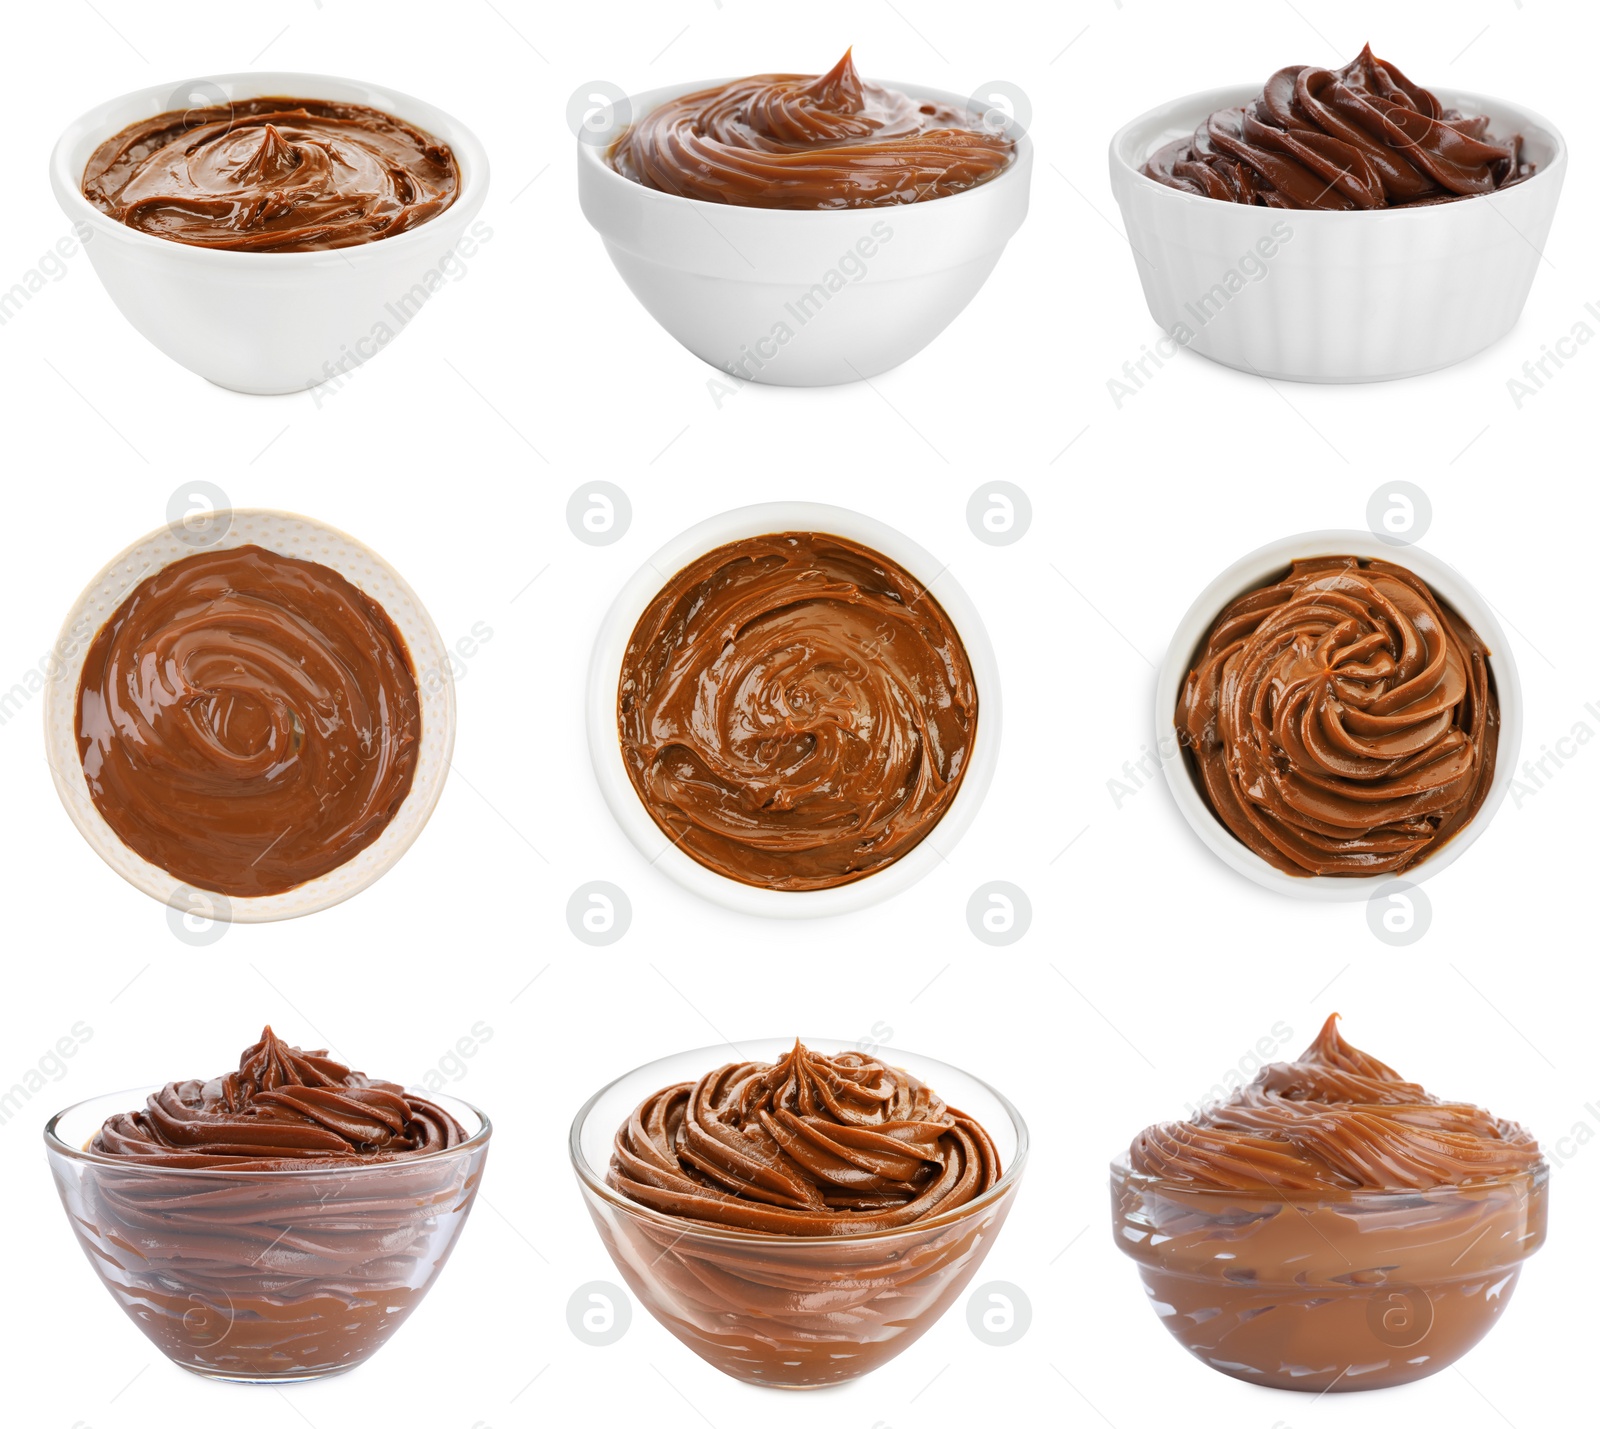 Image of Bowls with boiled condensed milk on white background, collage design